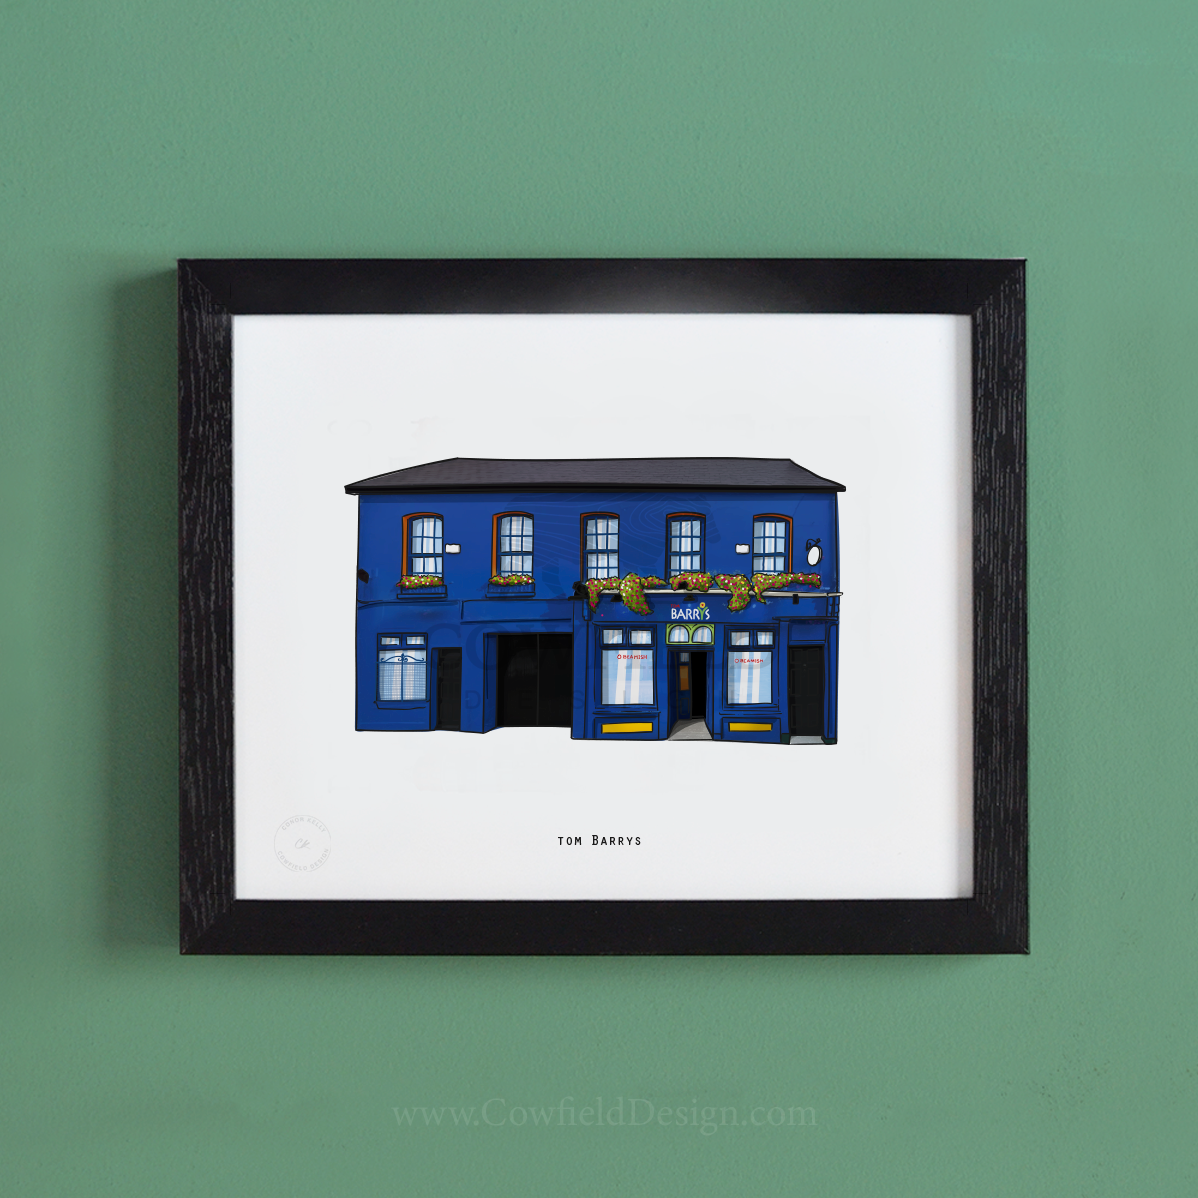 Tom Barry's Illustrated Pubs of Cork